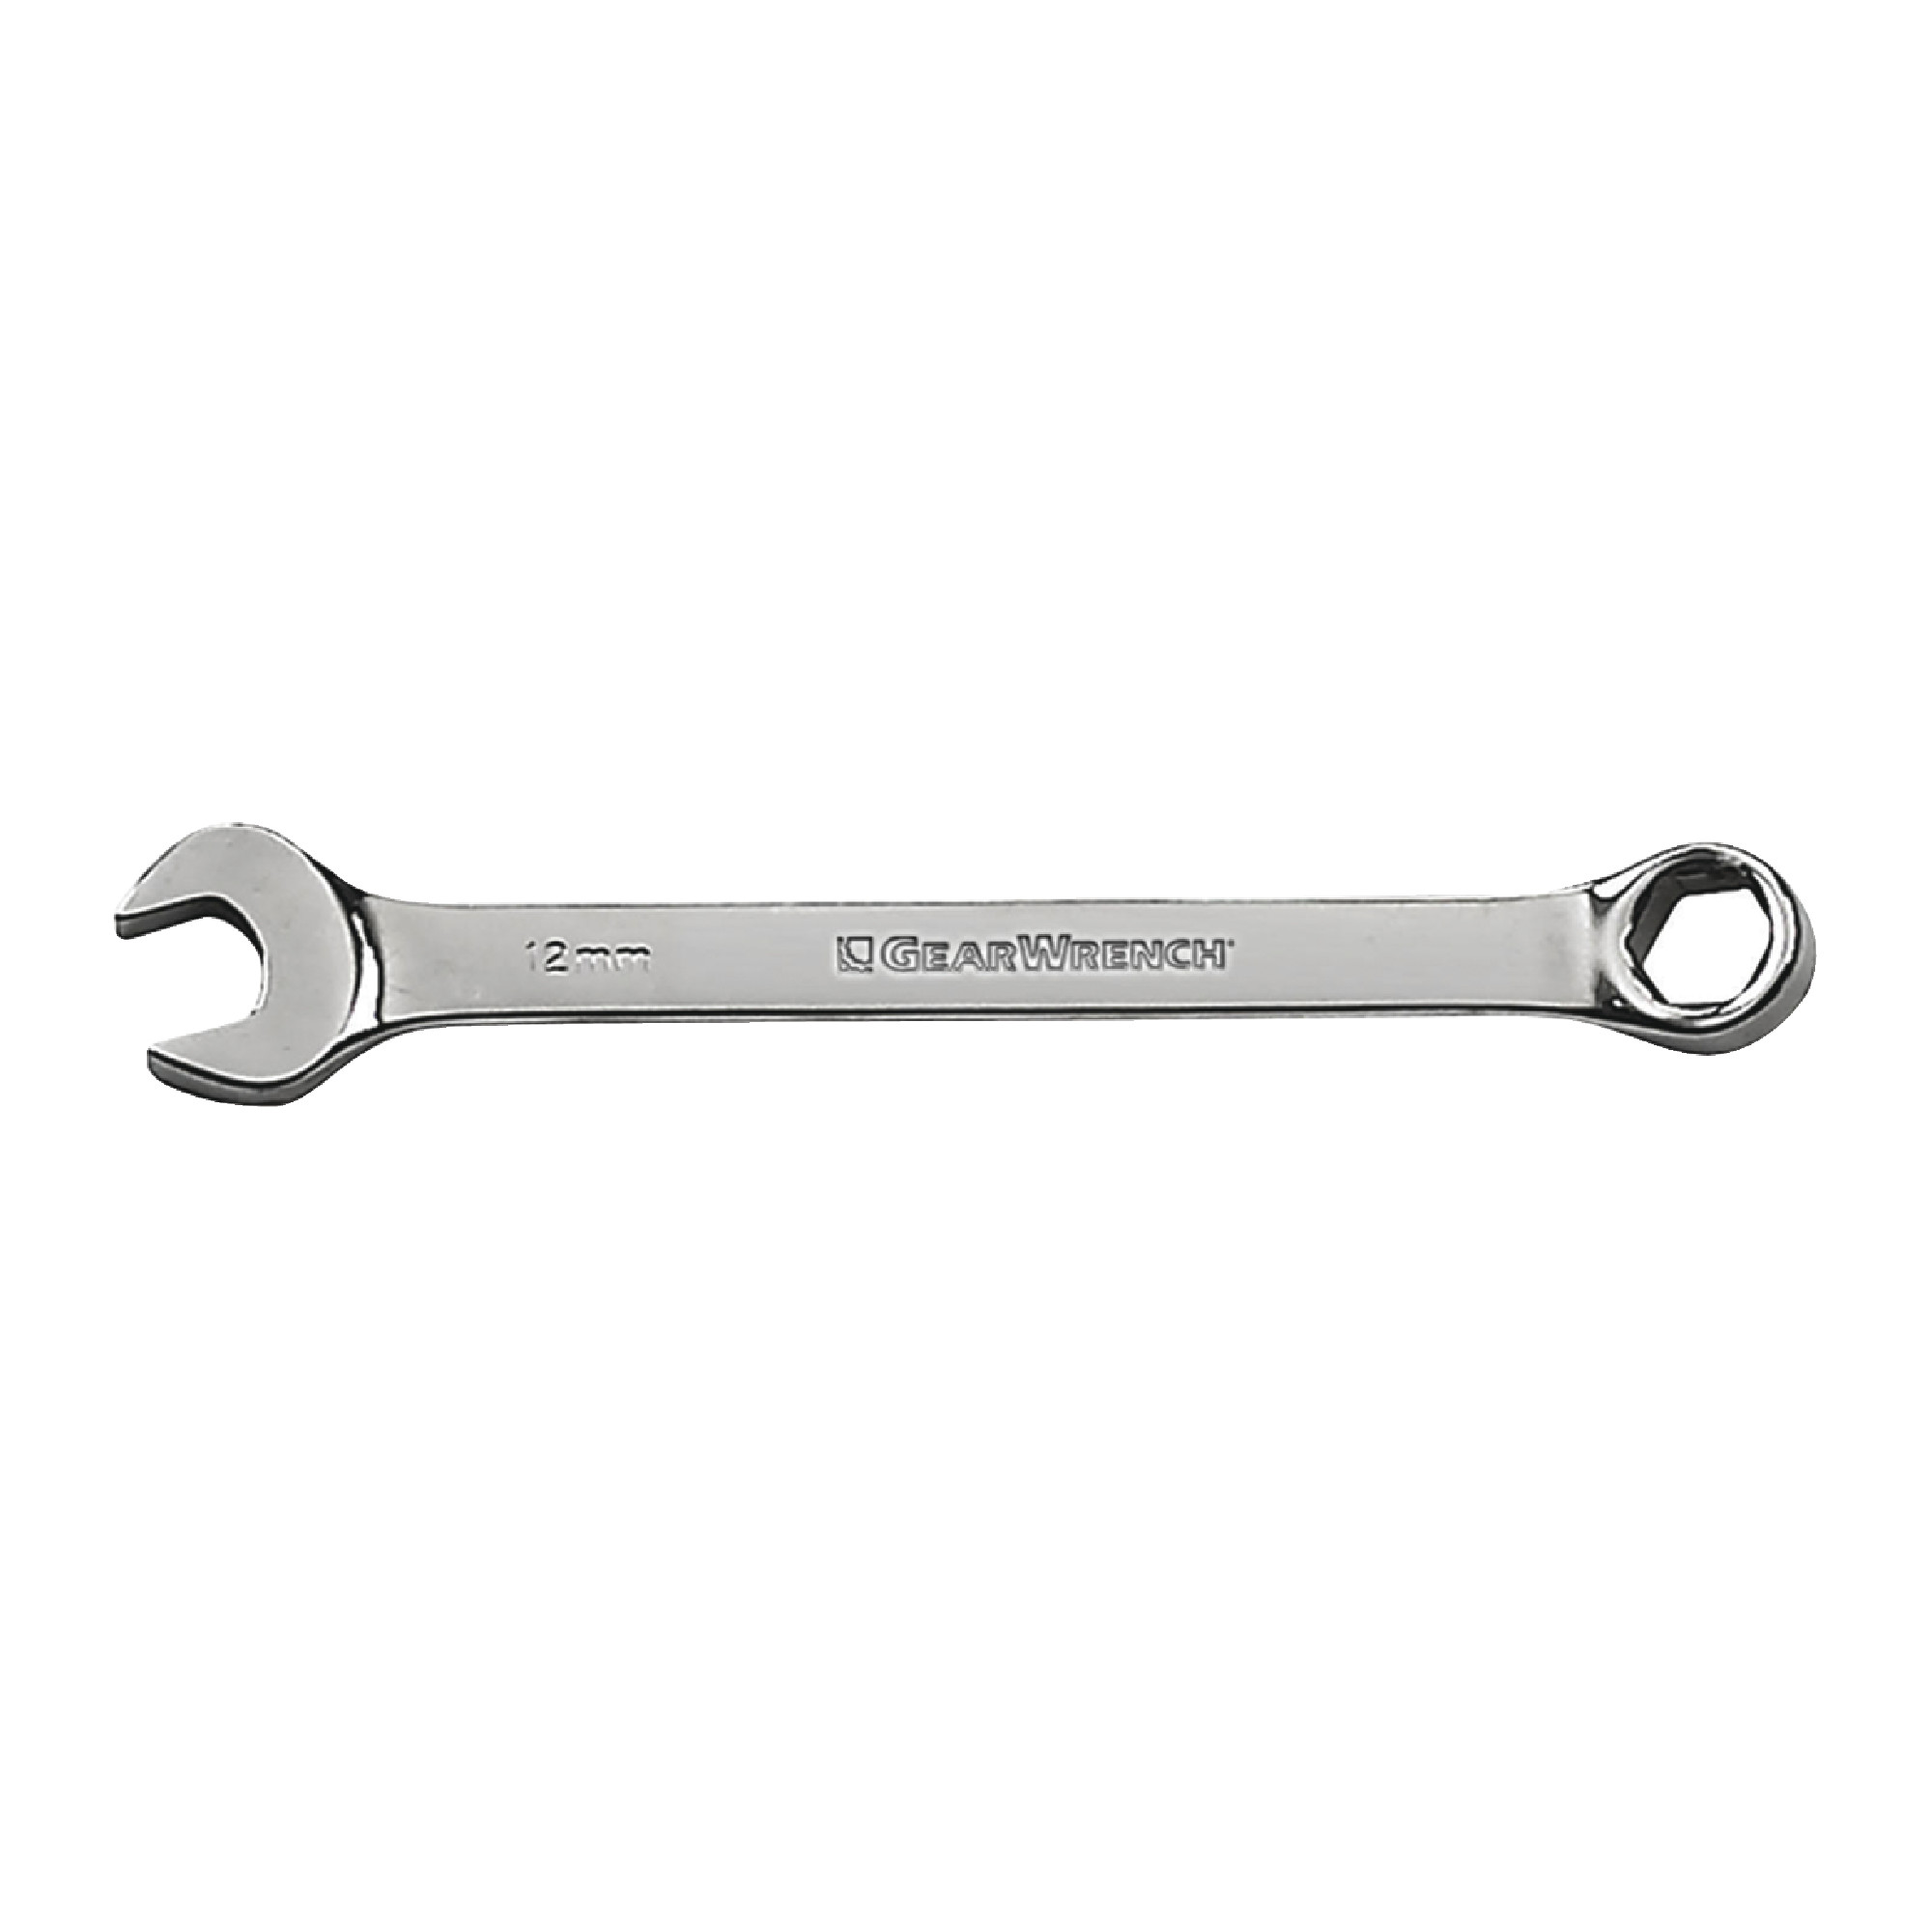 16mm 6 Point Combination Wrench